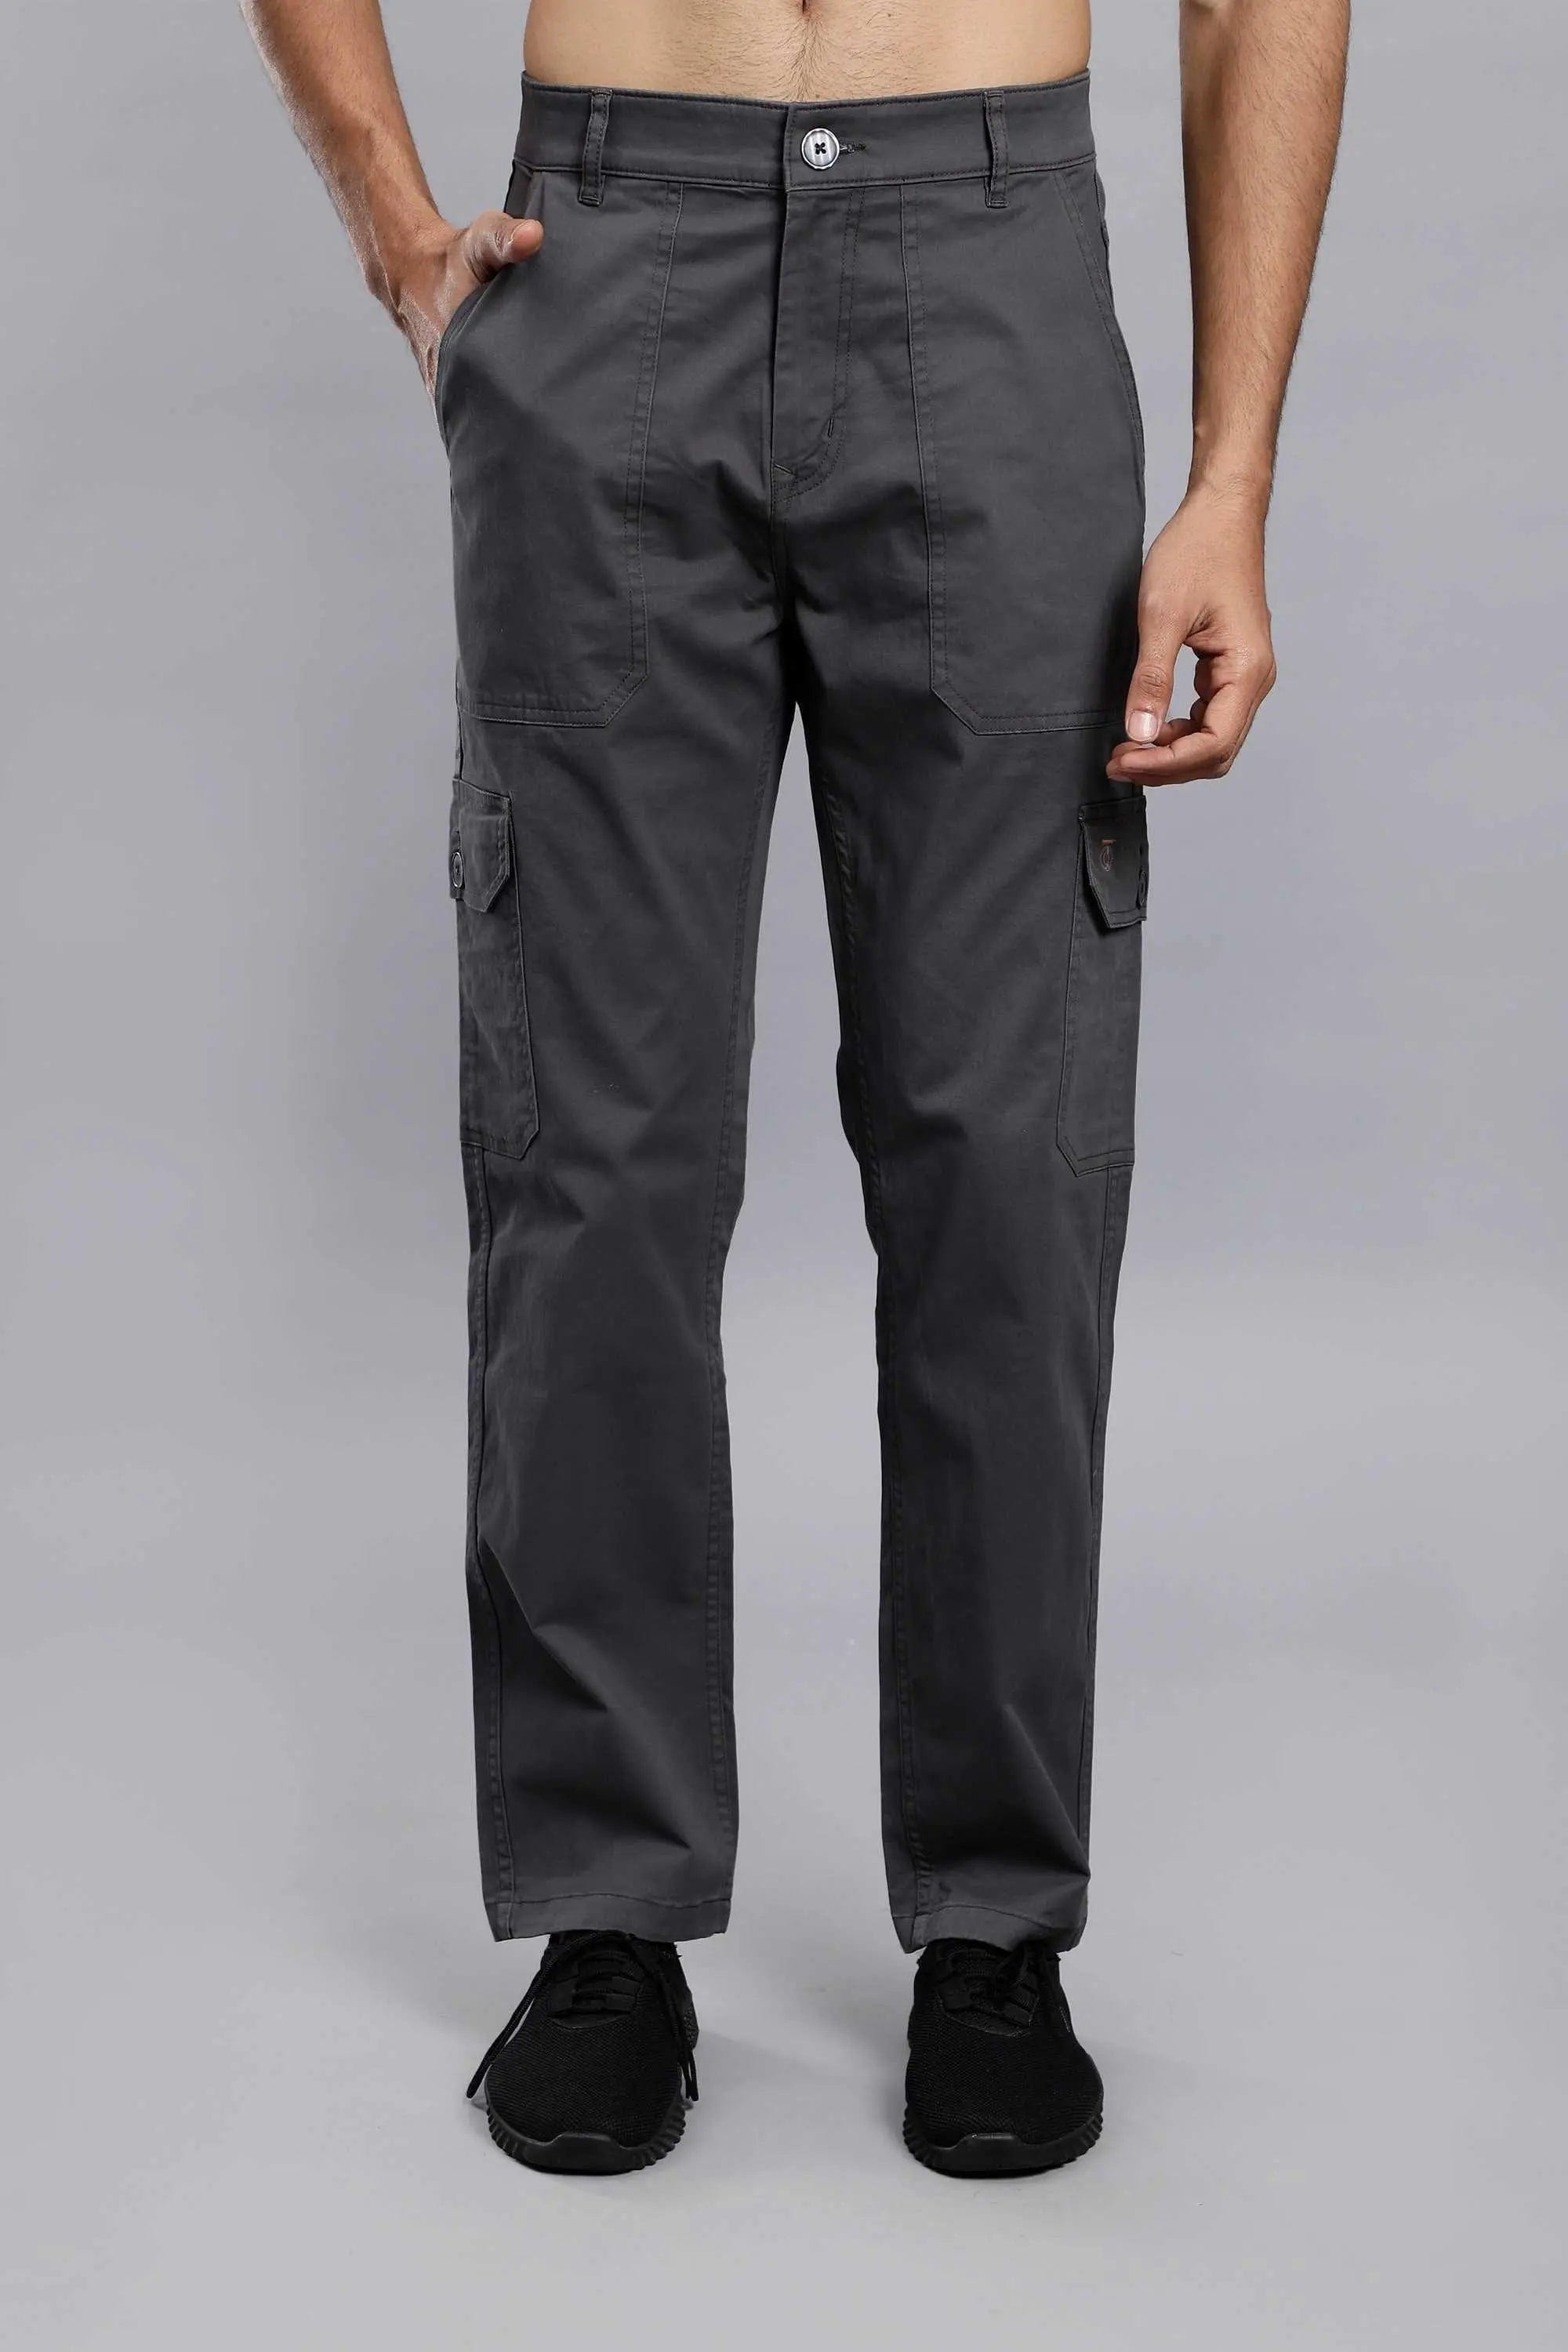 686 Men's Everywhere Pant - Wide Fit – 686.com